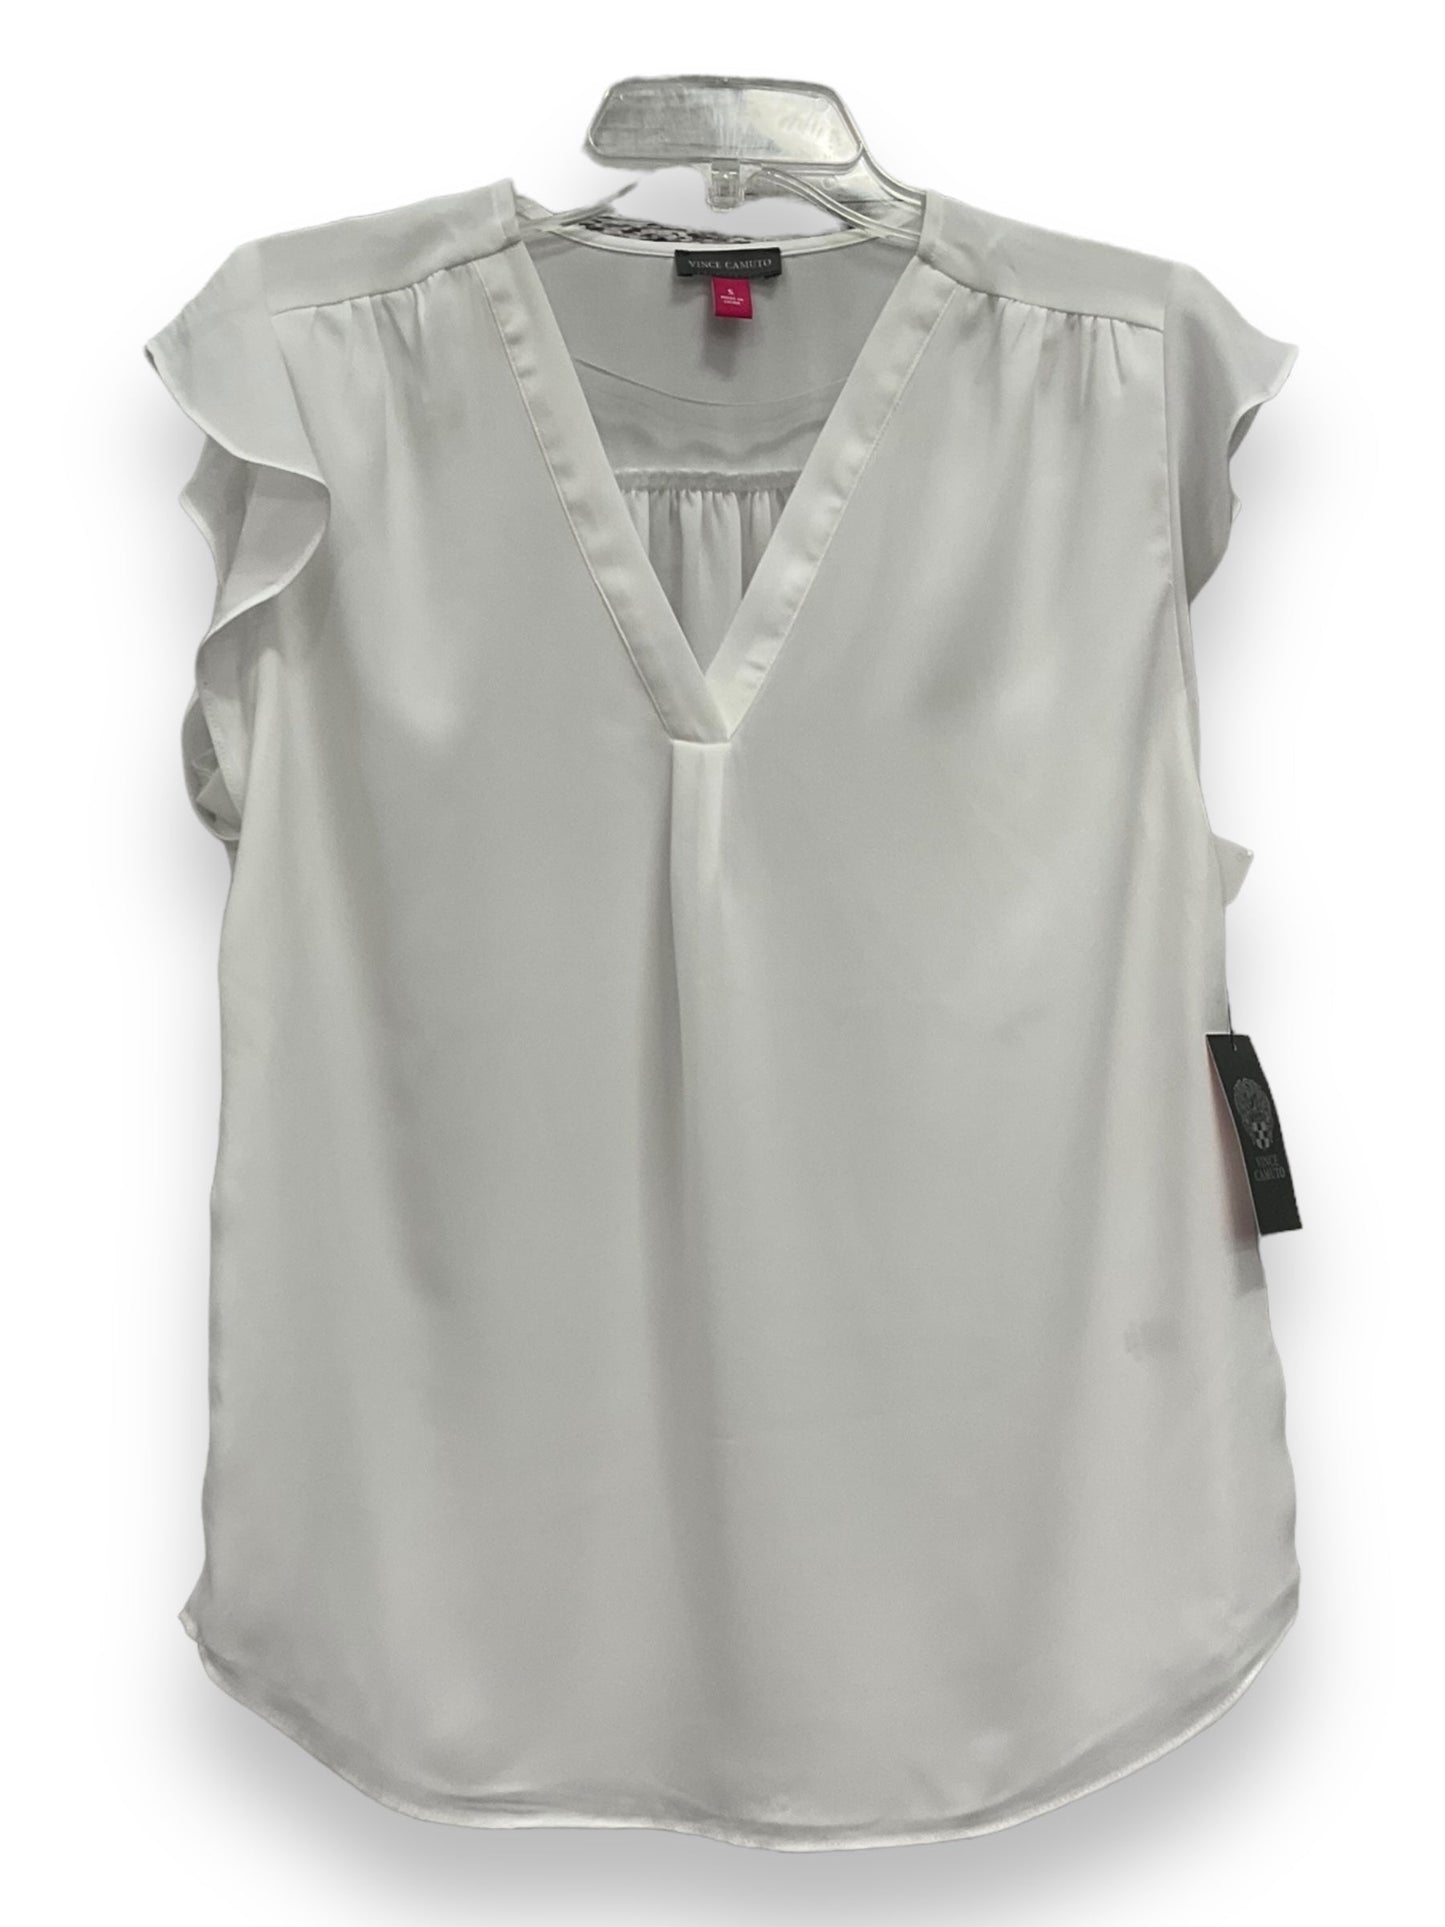 White Blouse Sleeveless Vince Camuto, Size S